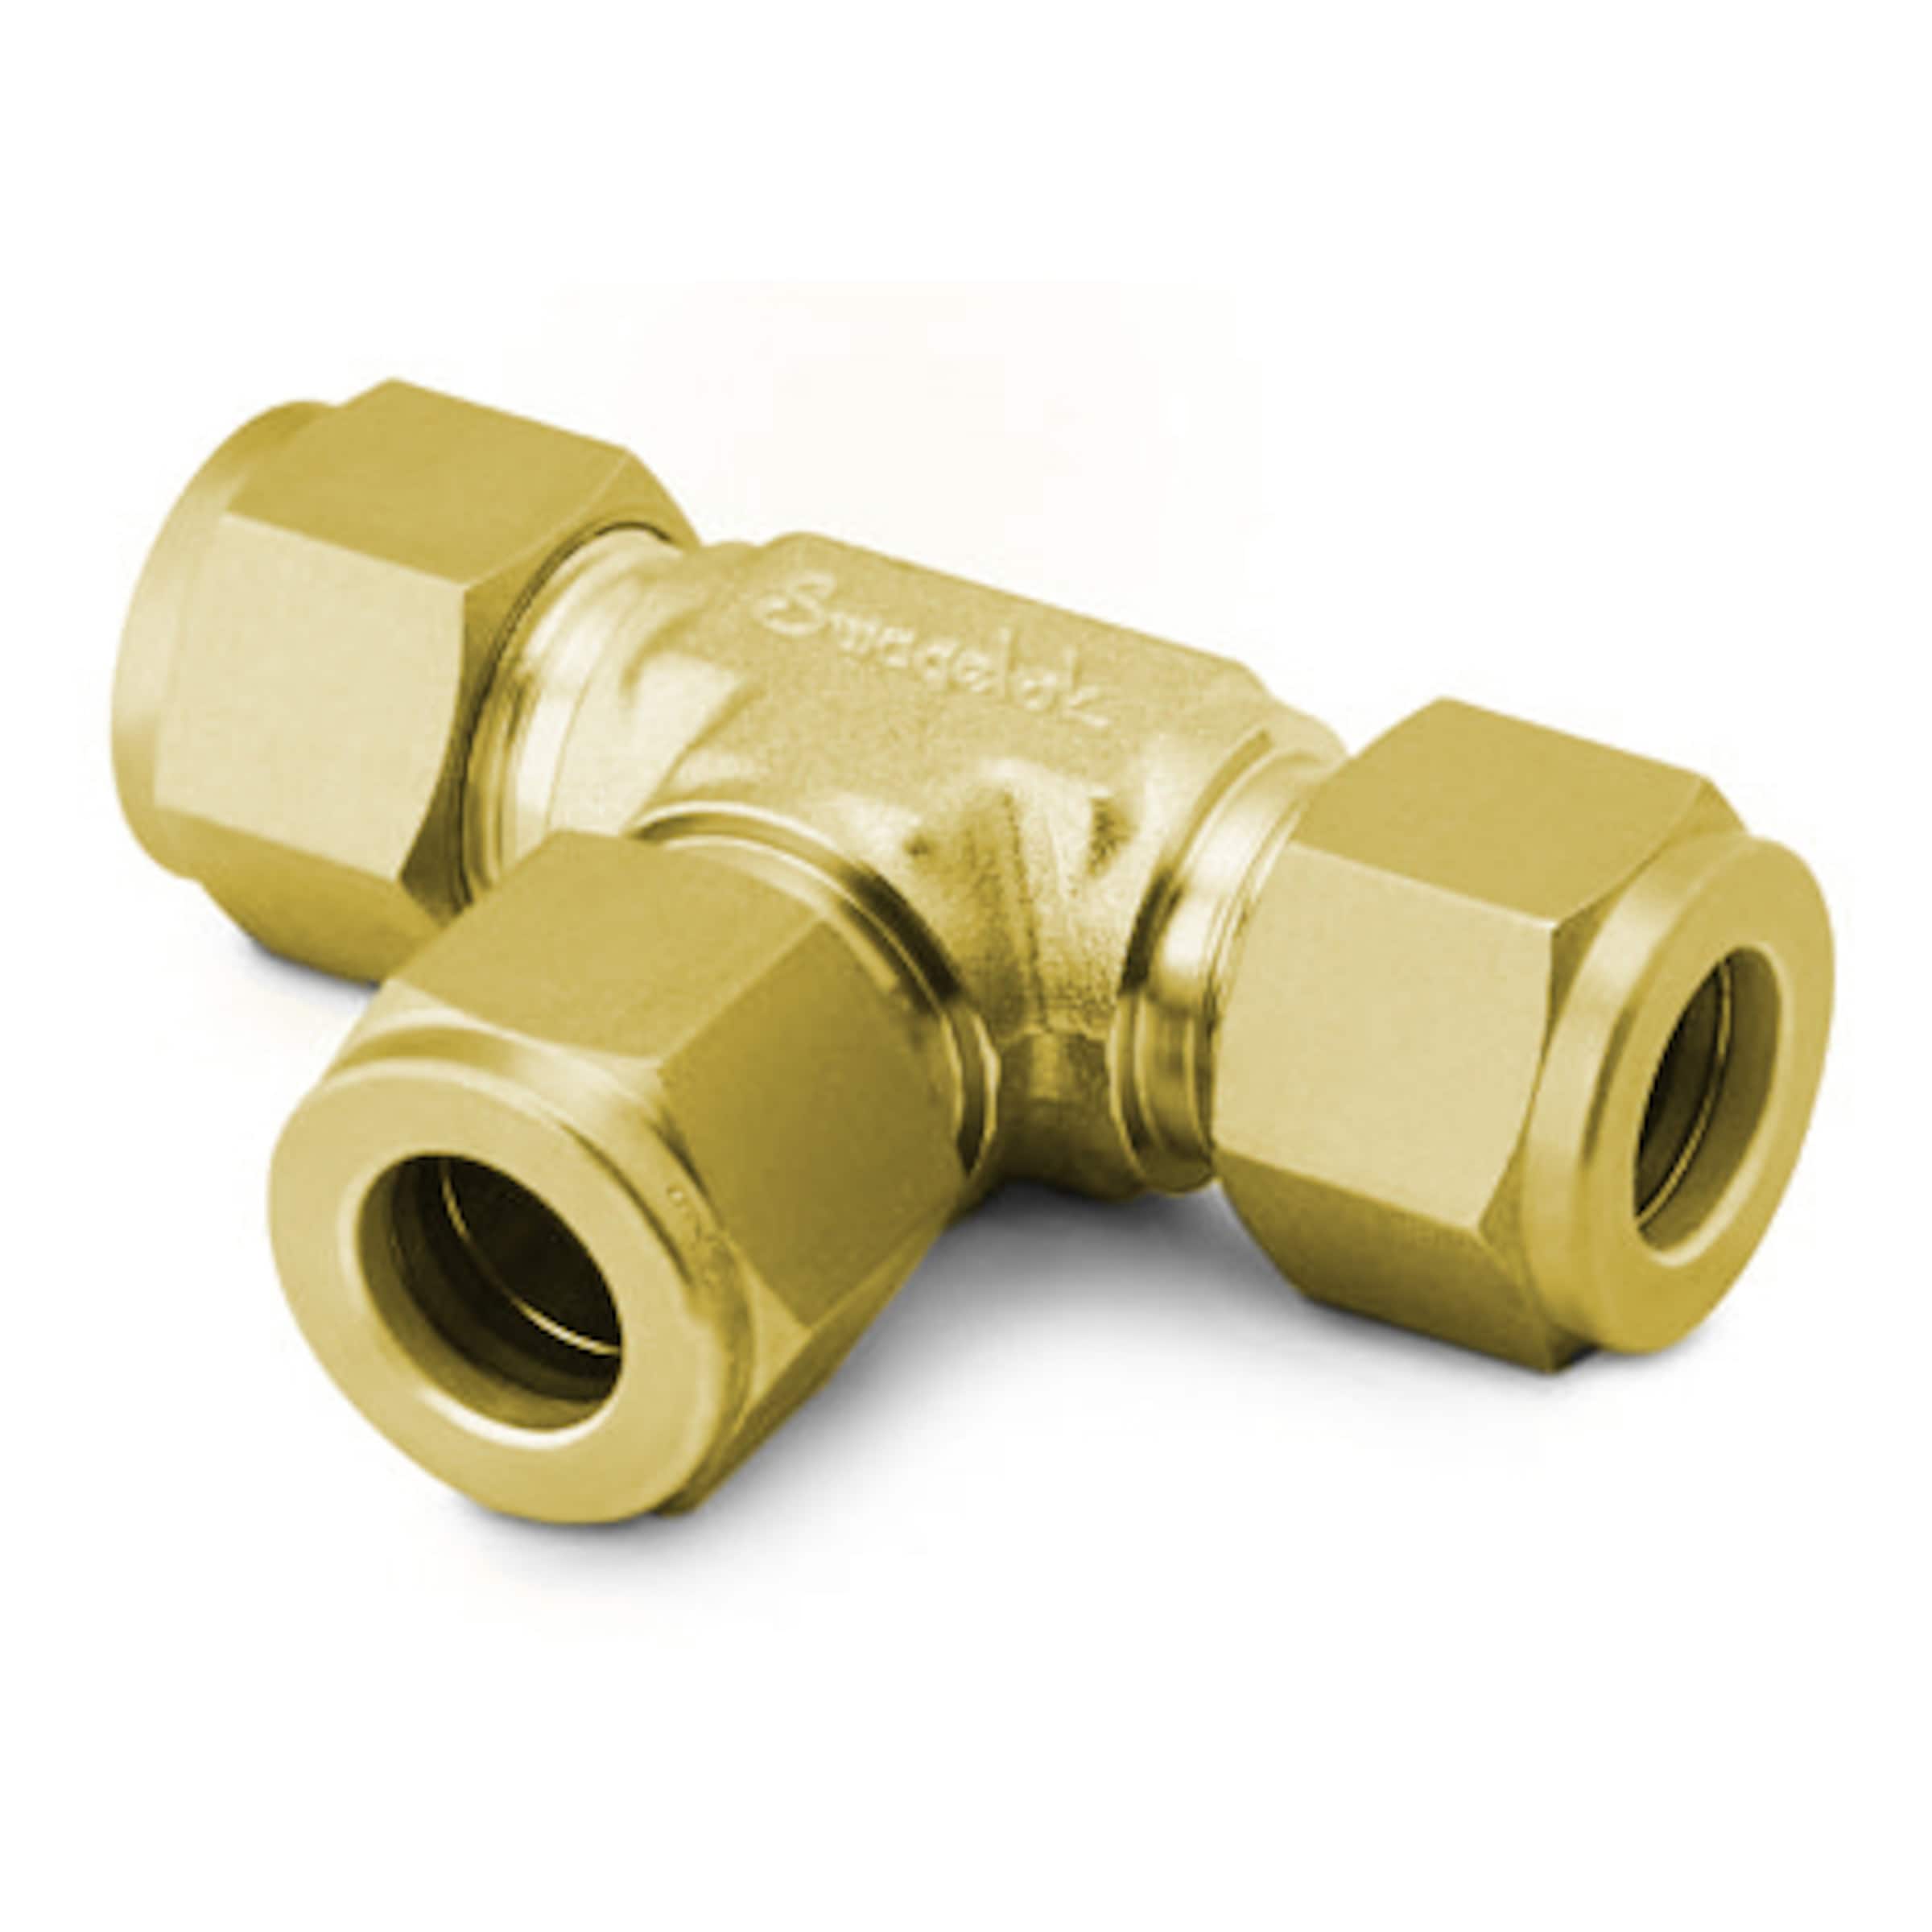 Brass Swagelok Tube Fitting, Reducing Union Tee, 1/2 in. x 1/2 in